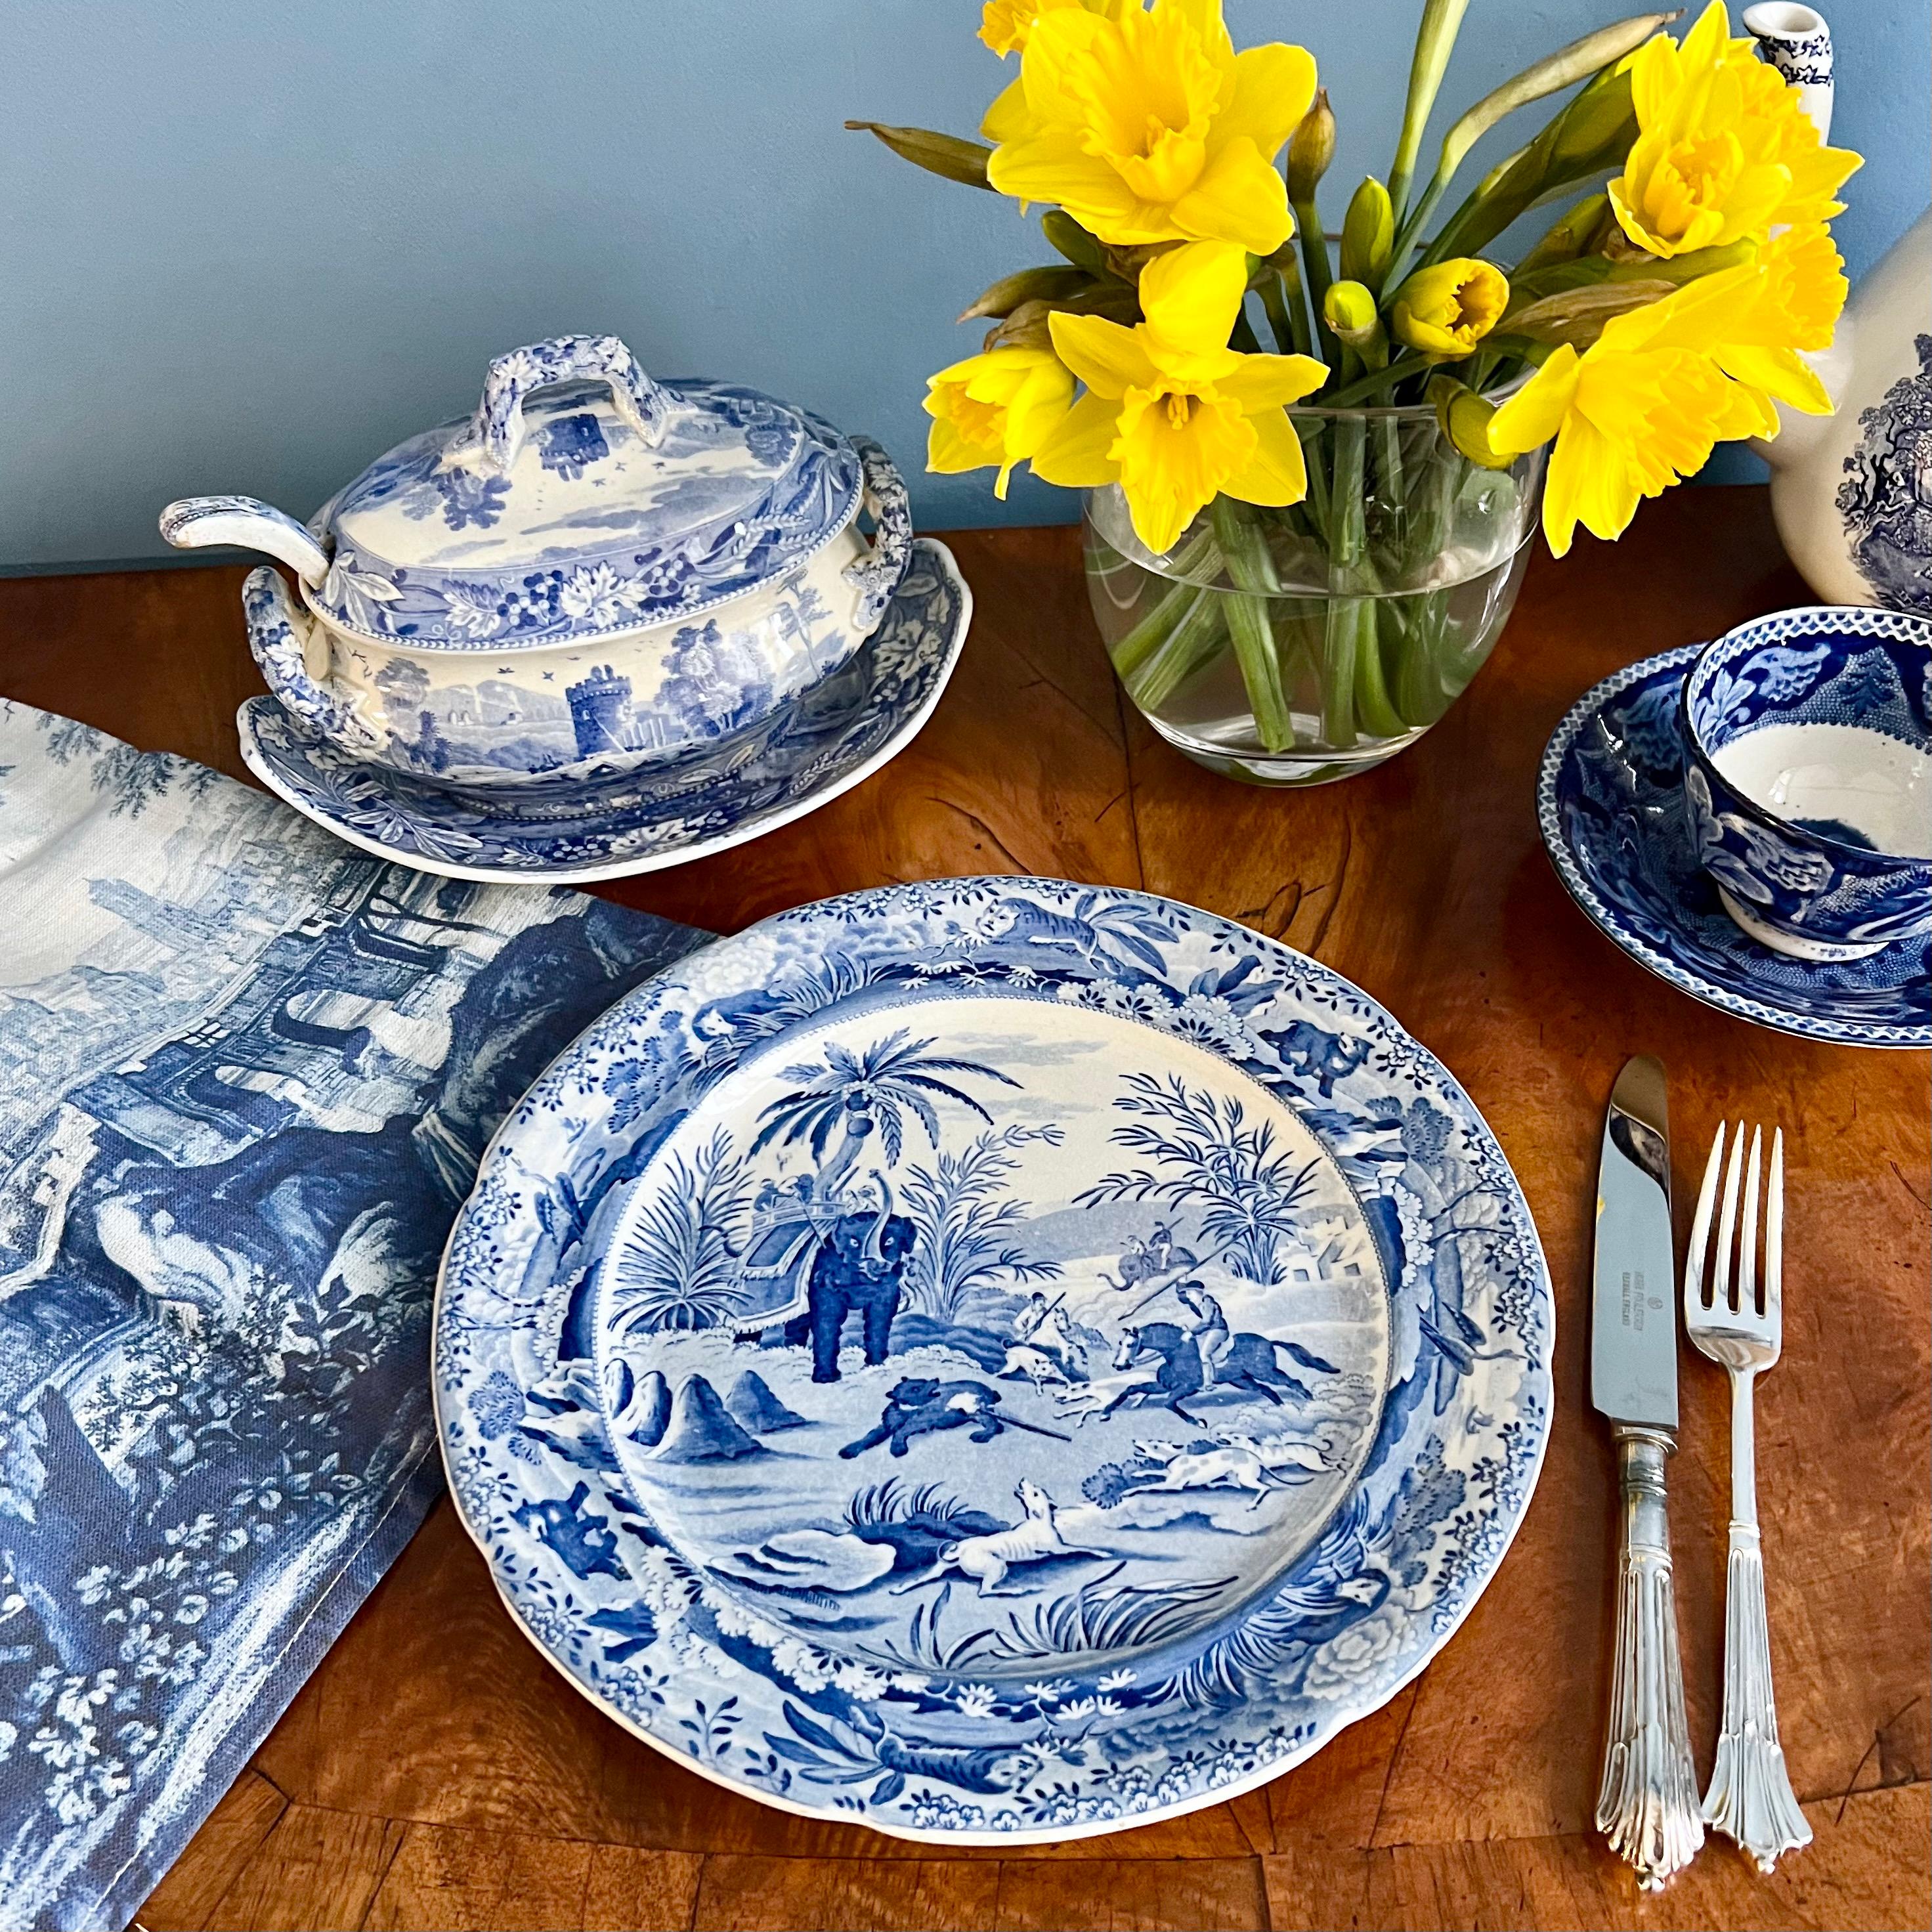 This is a beautiful dinner plate made in about 1850 by Edward Challinor. The plate is made of pearlware and decorated with a blue and white transfer print that is a close copy of Spode' famous 